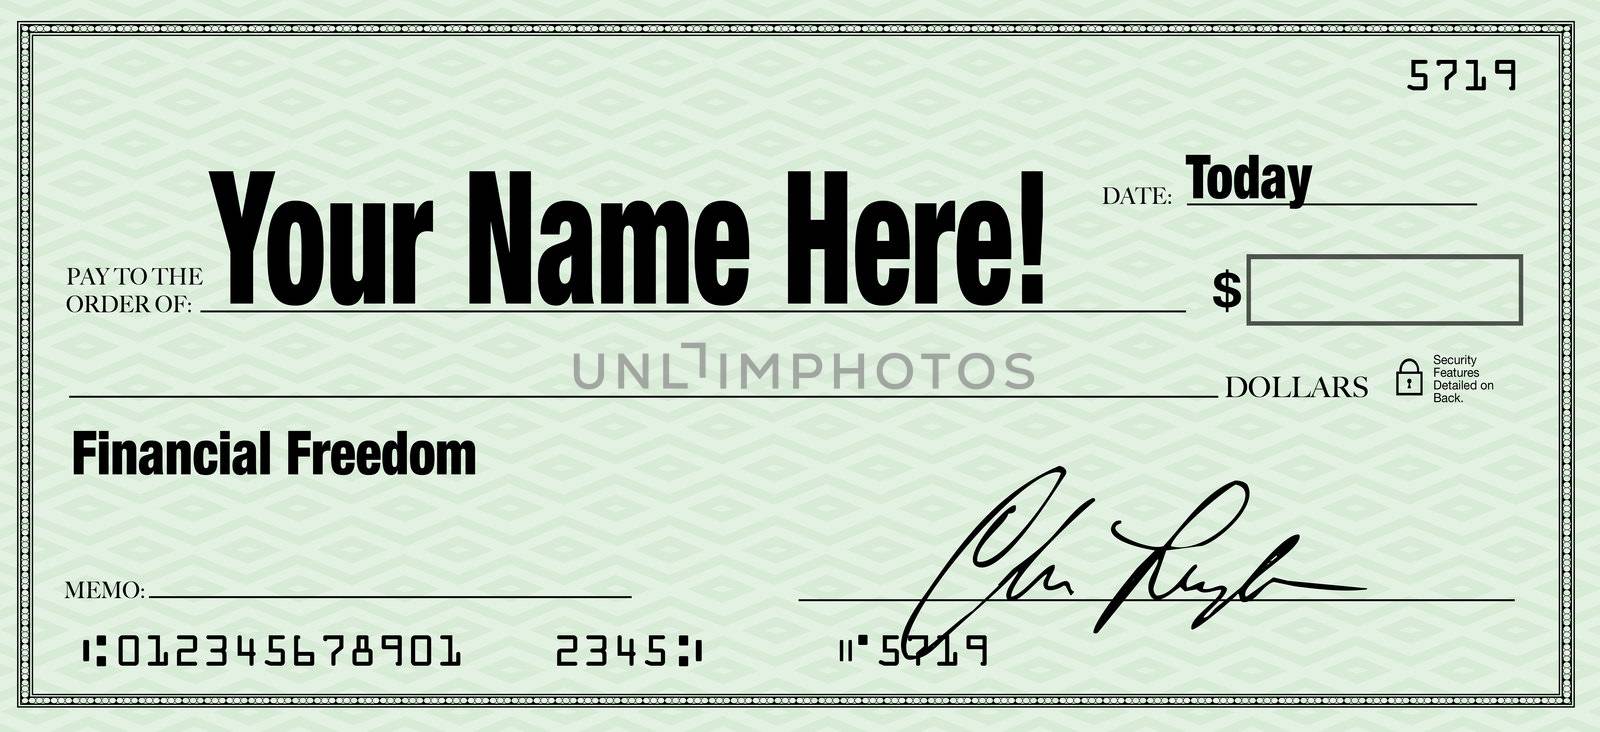 Financial Freedom - Your Name on Blank Check by iQoncept